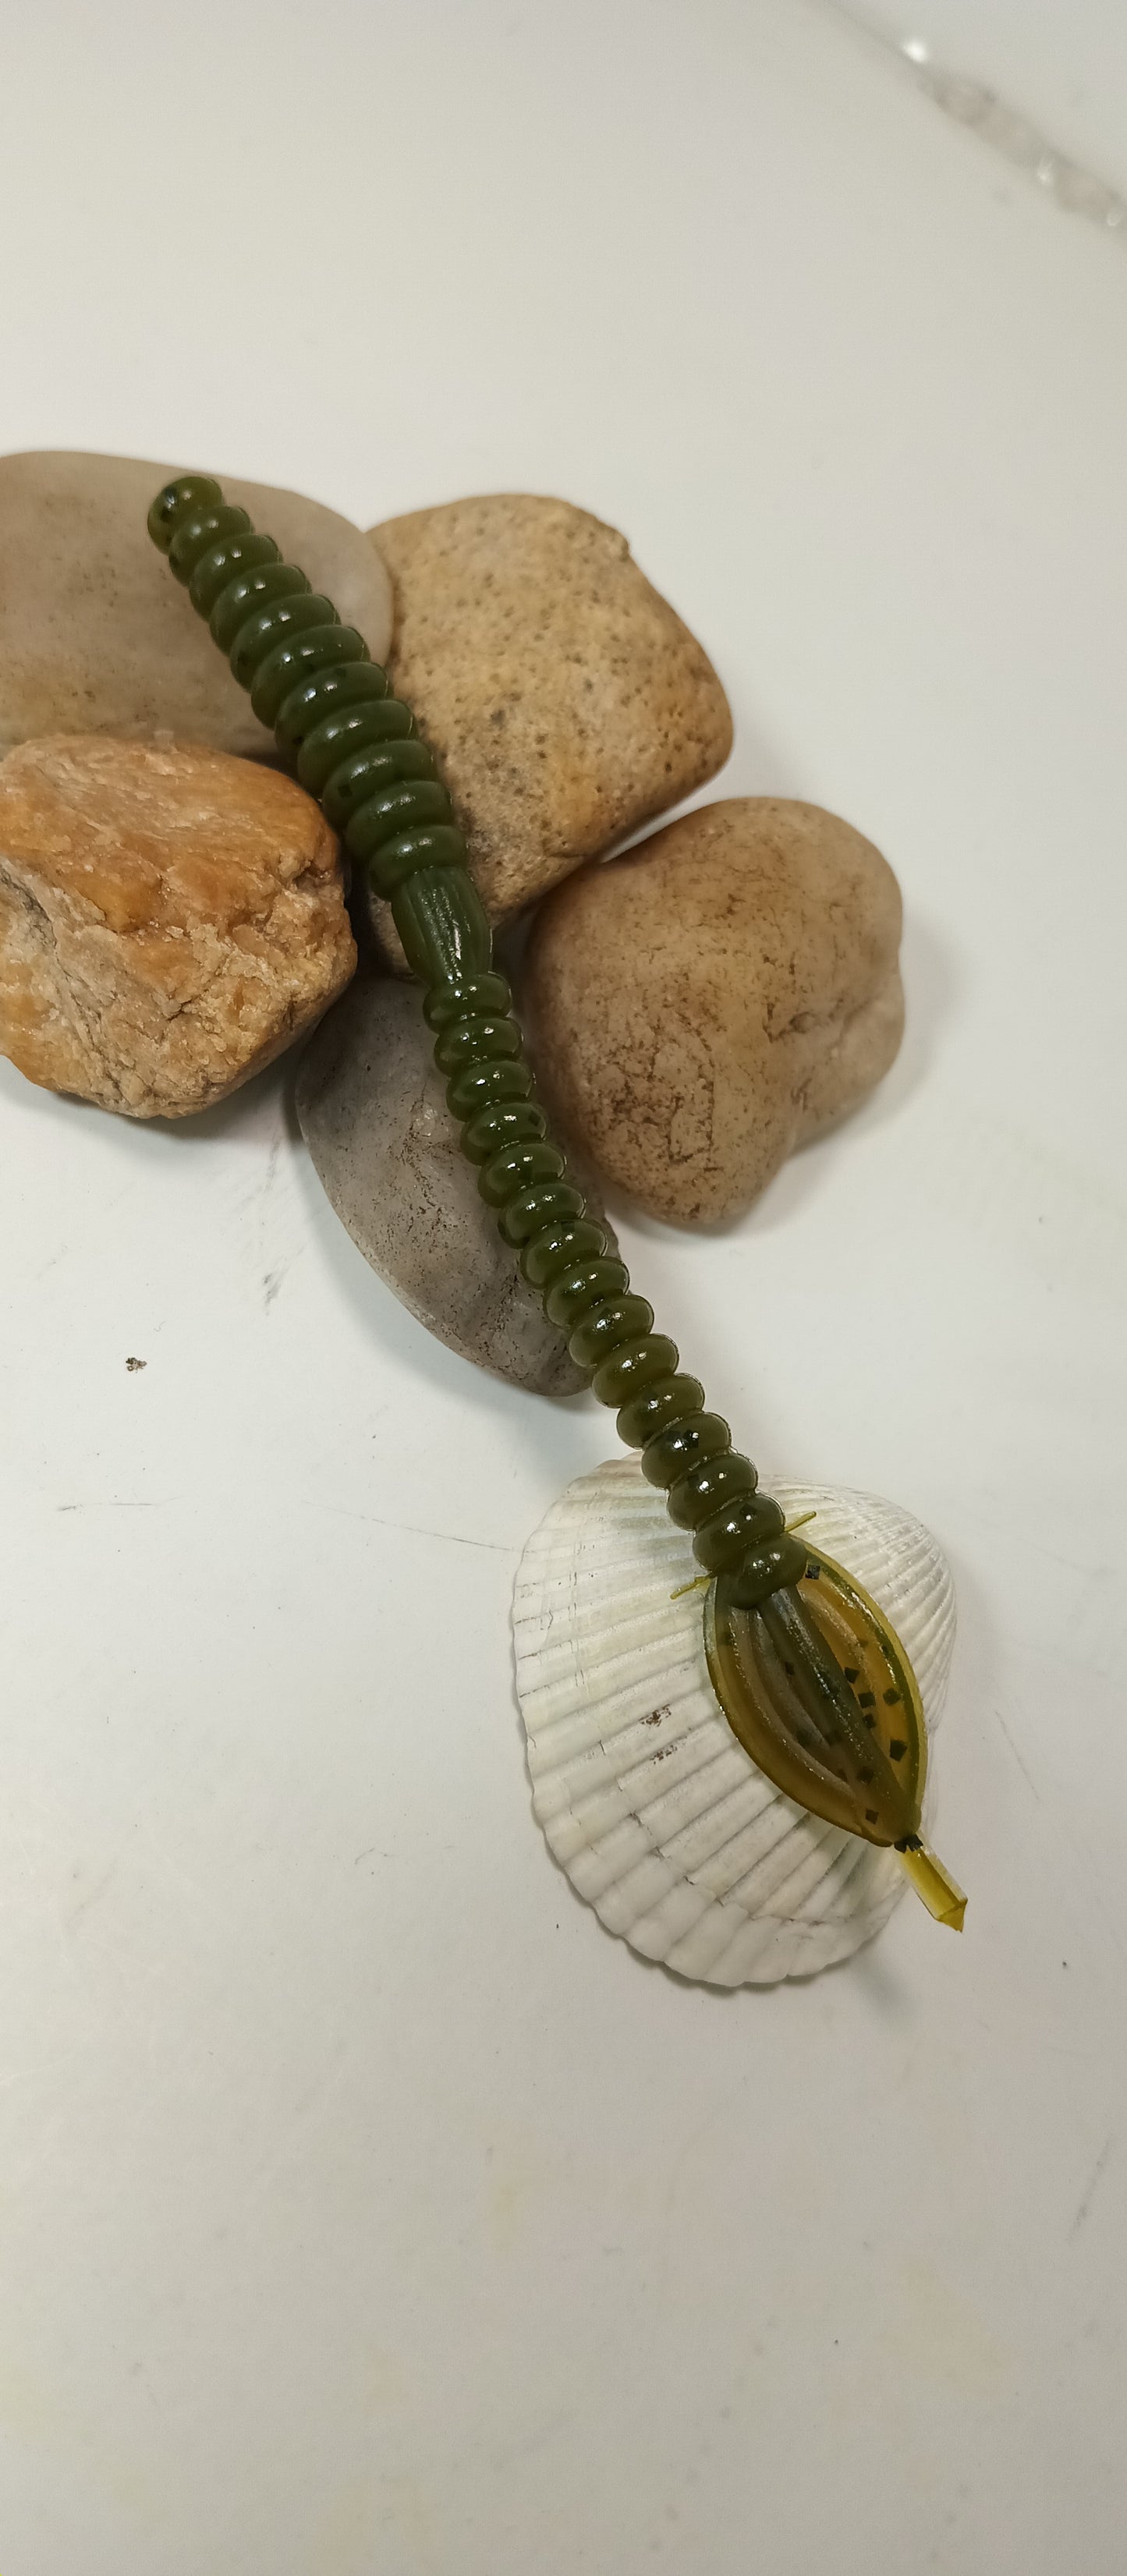 4 " Finesse worm